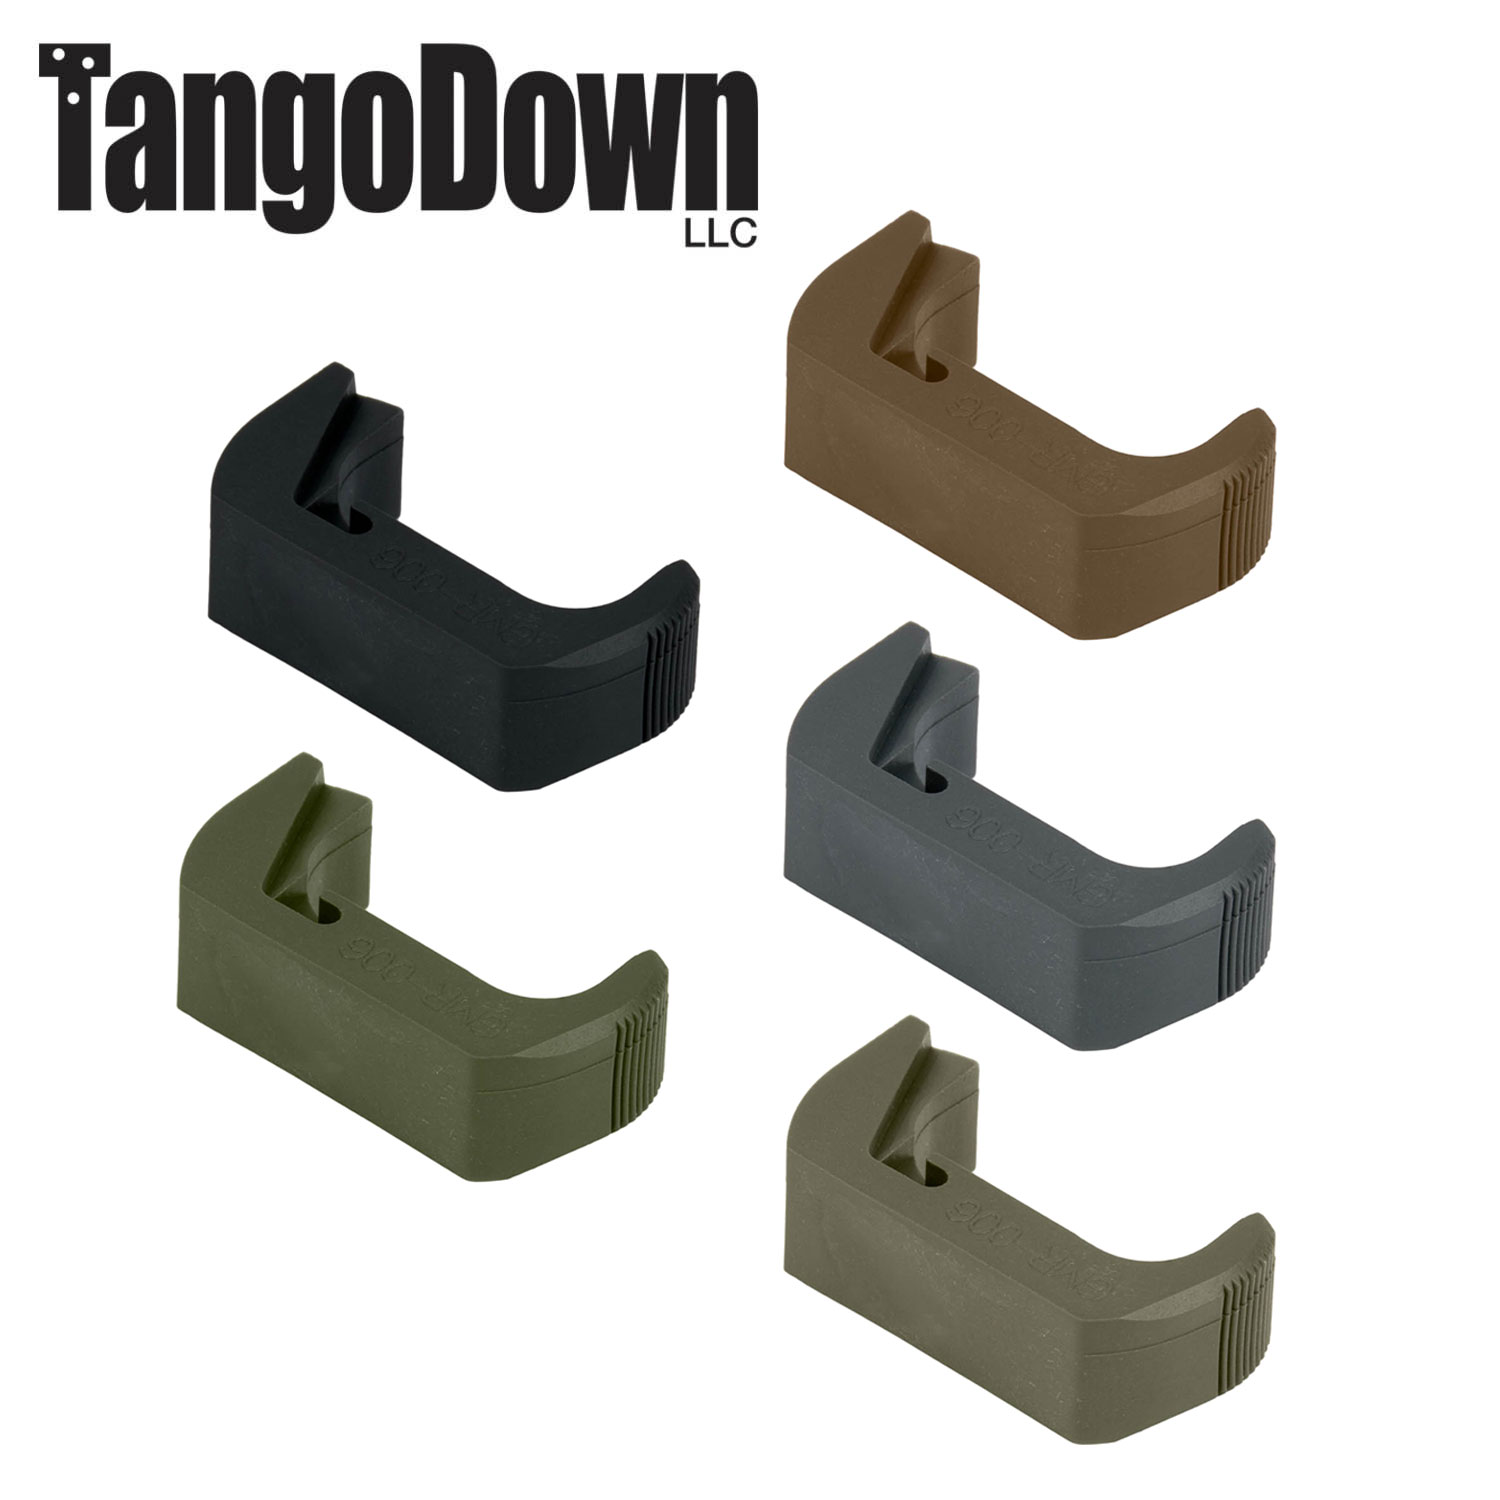 TANGO DOWN VICKERS Extended Magazine Release For GLOCK 43 Choose Color 